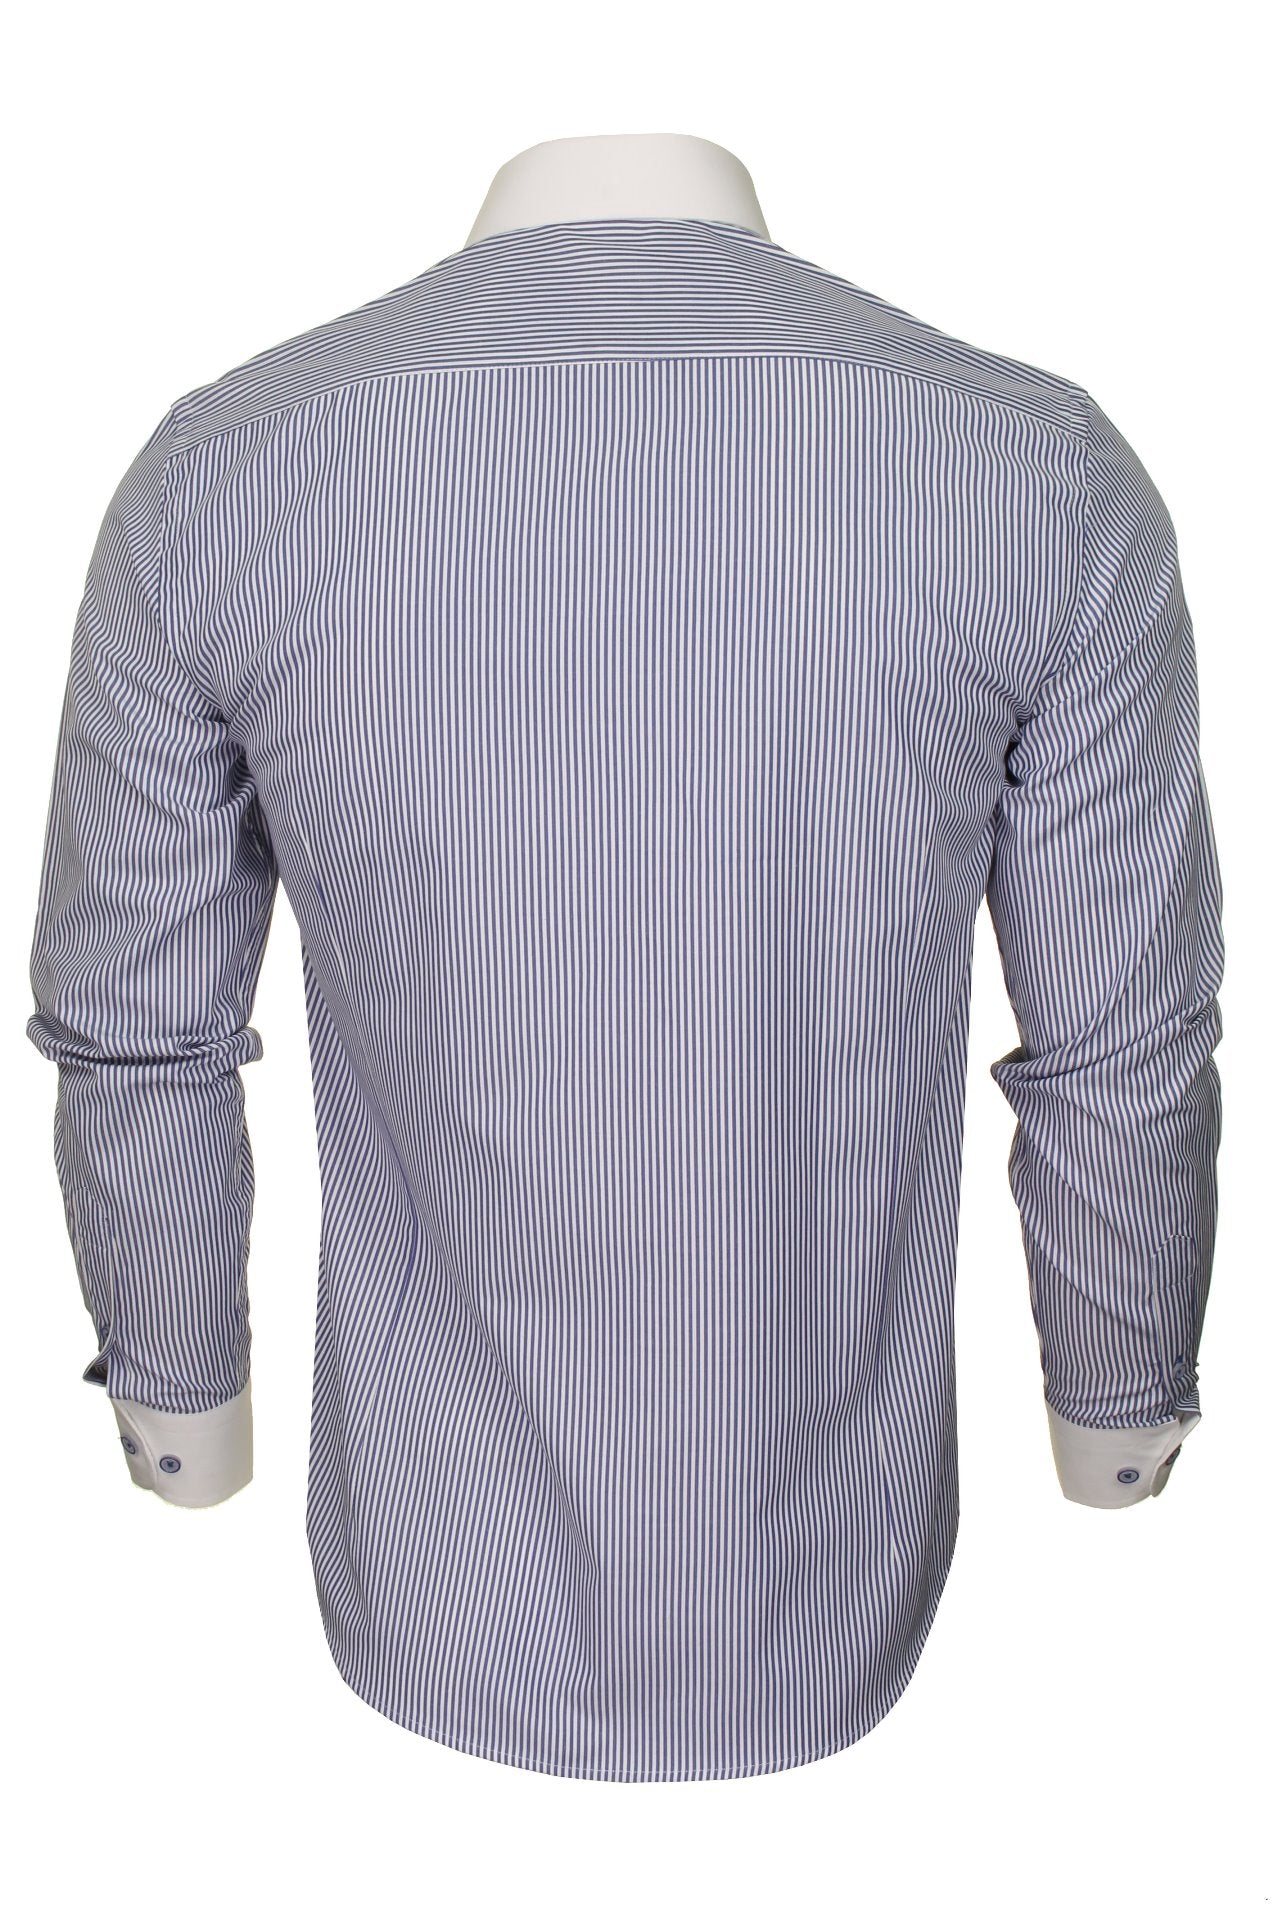 Xact Men's Long-Sleeved Striped Shirt with White Penny/Club Collar and White Cuffs-3